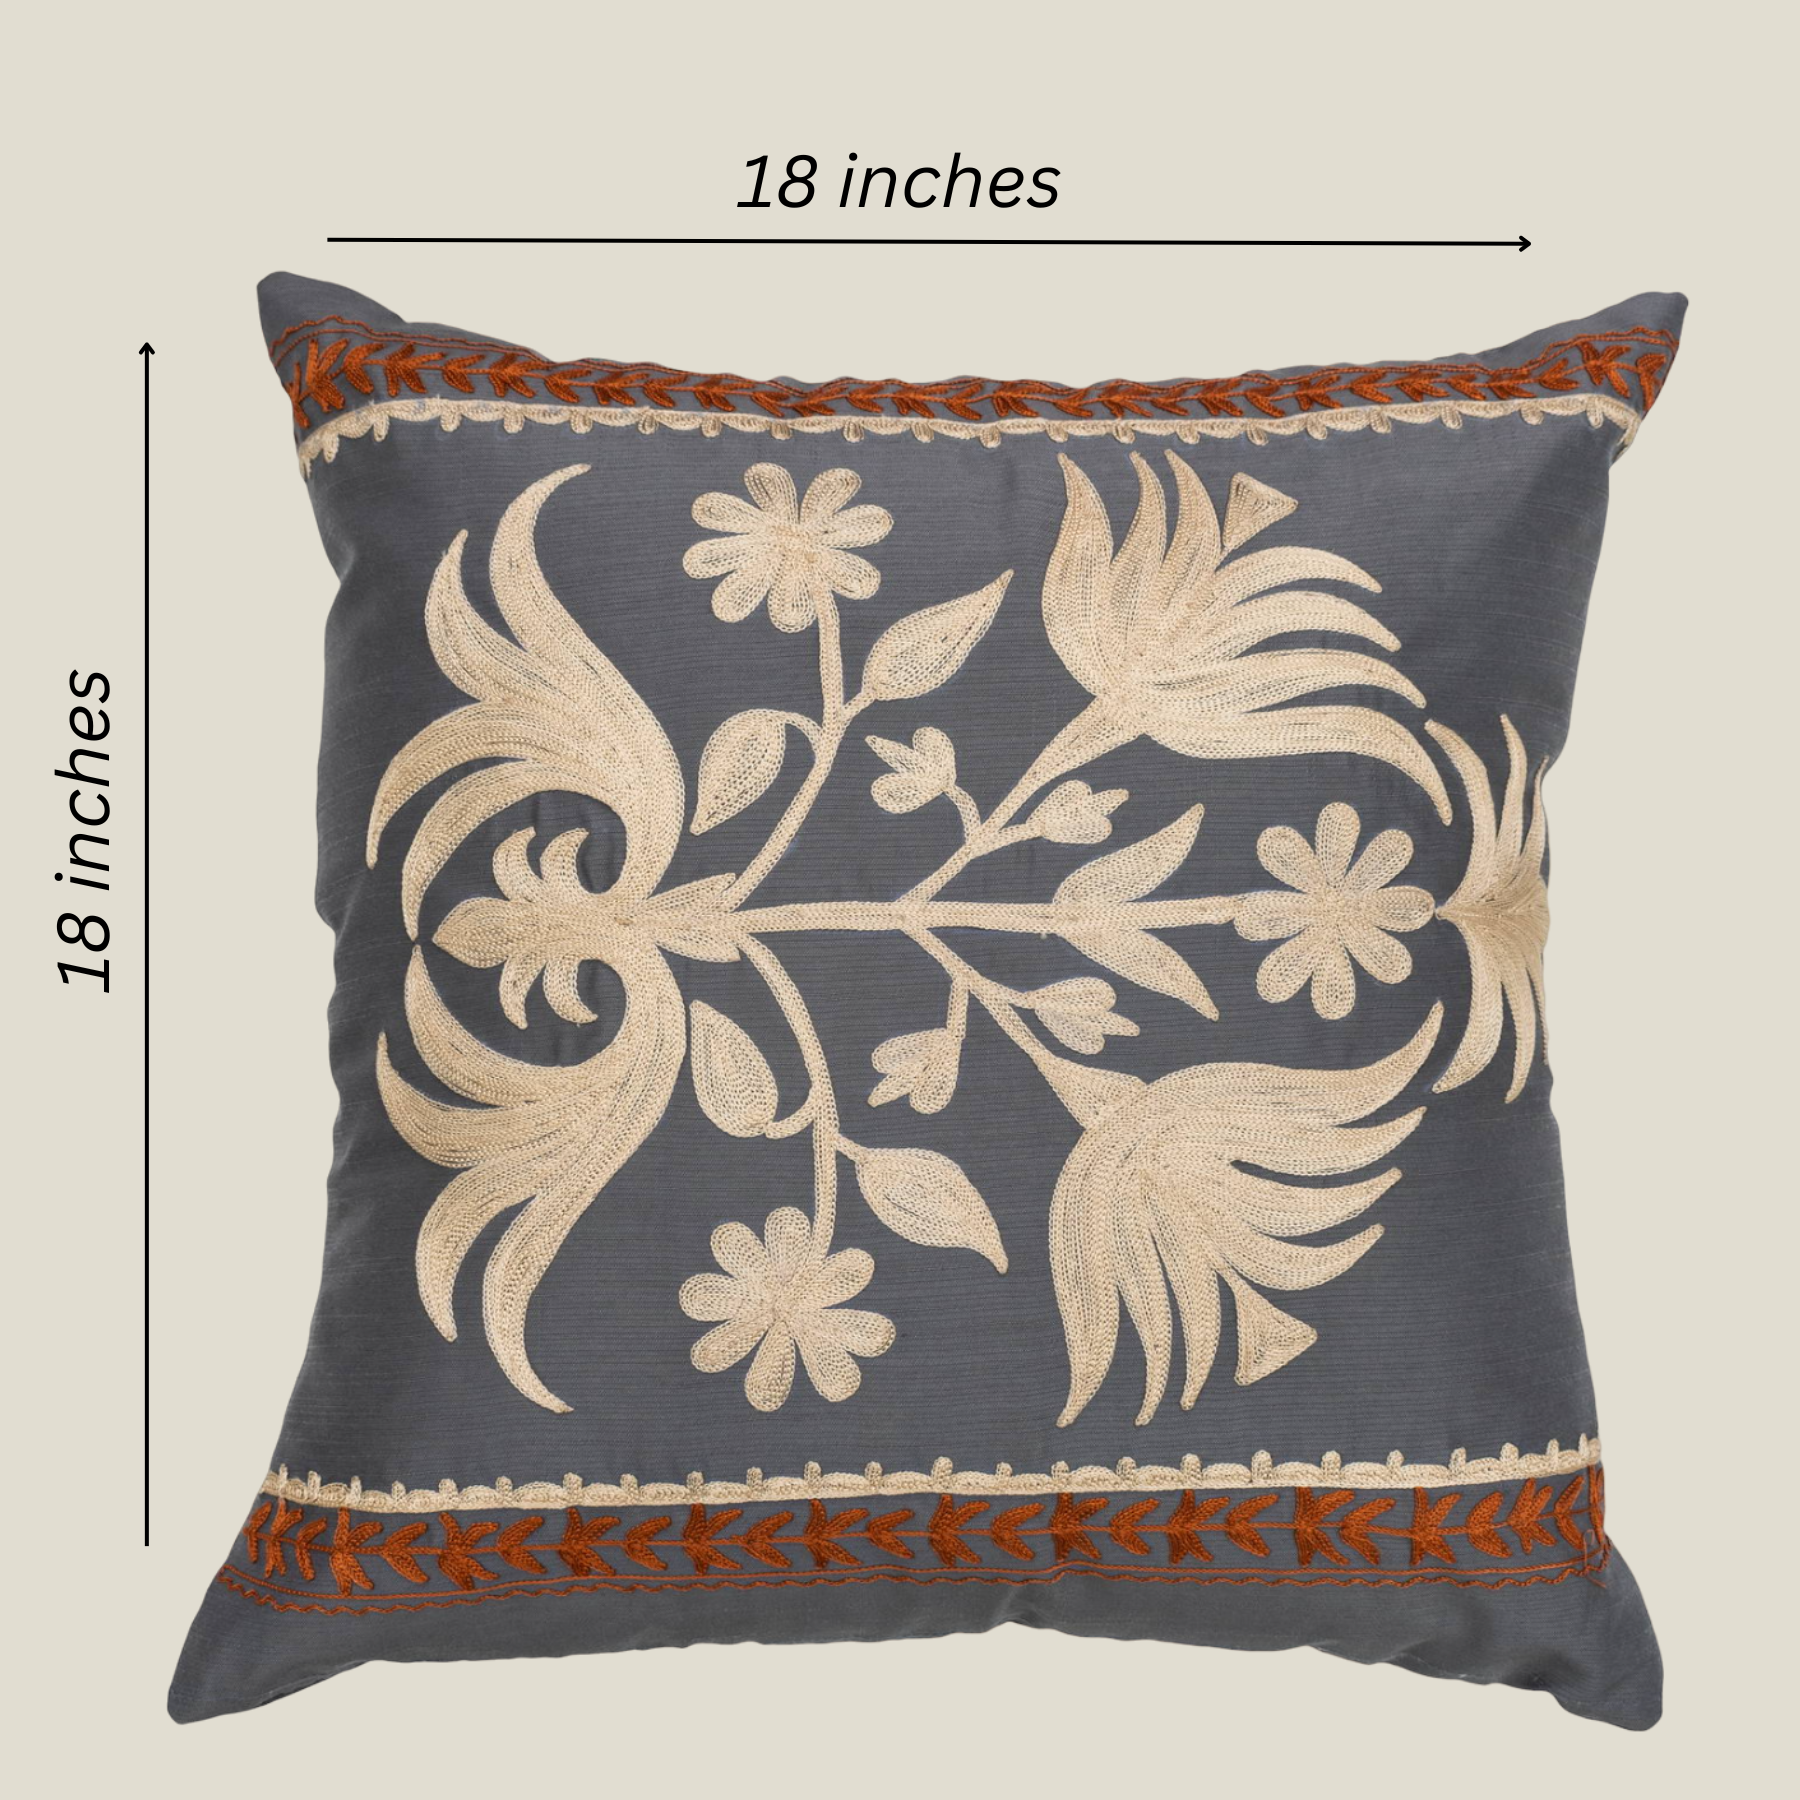 The Luxelife Grey Dupion Floral Embroidered Cushion Cover